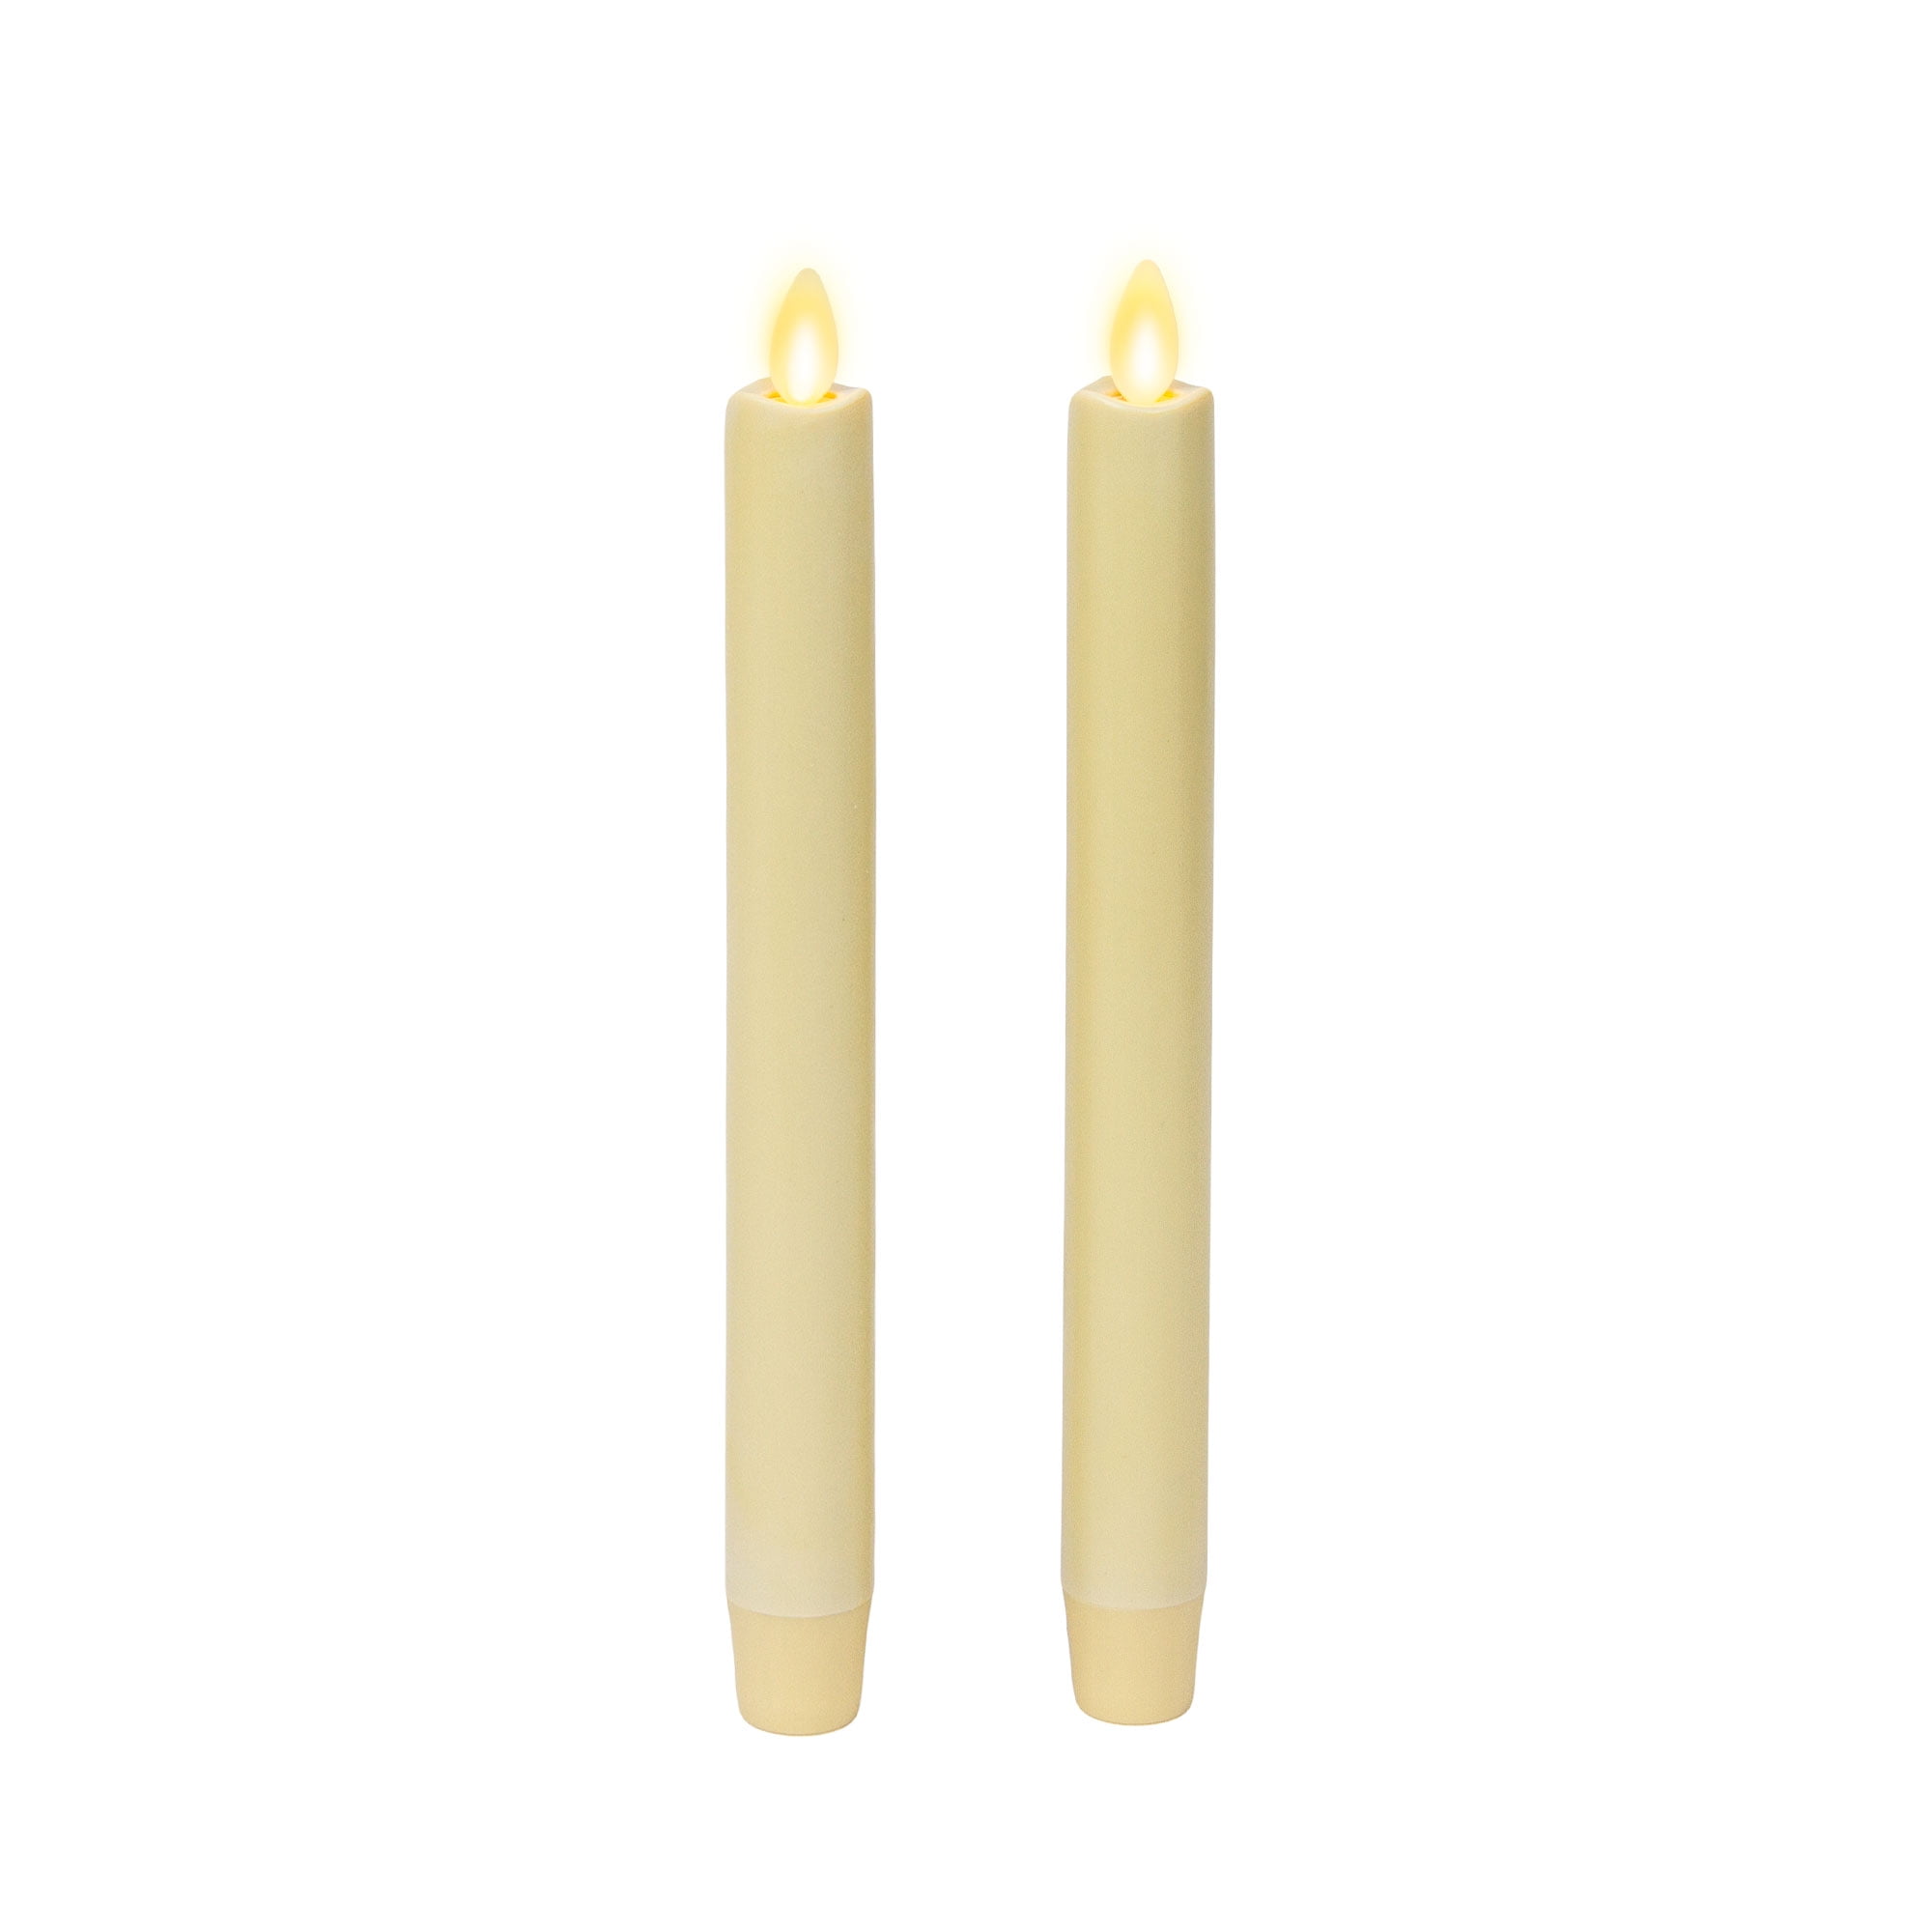 2PCS Luminara Flickering Moving Wick Flameless Led Taper Candle with Remote 